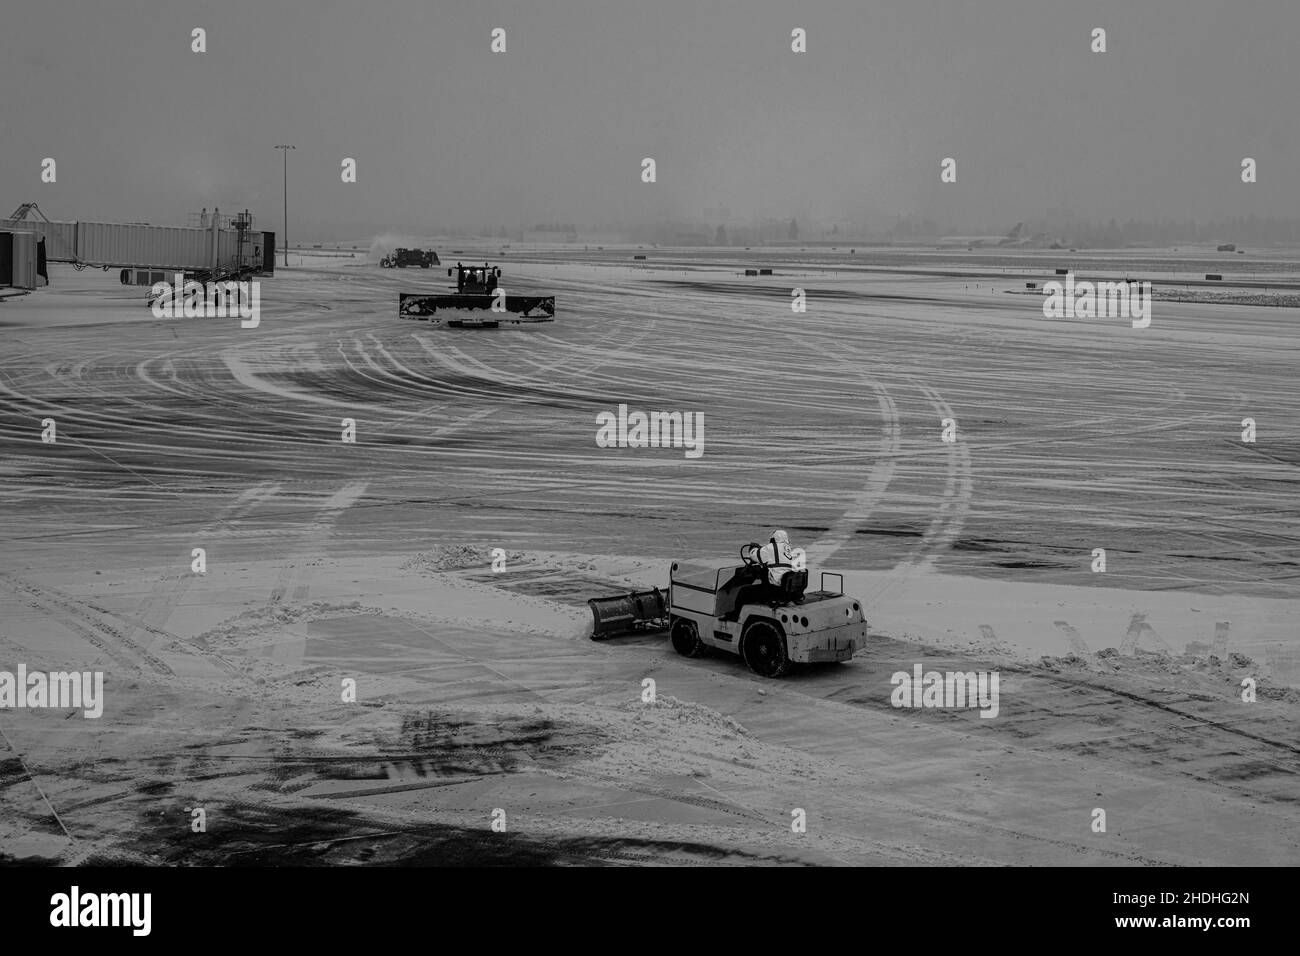 Activities at Airport with Heavy Snowfall Stock Photo